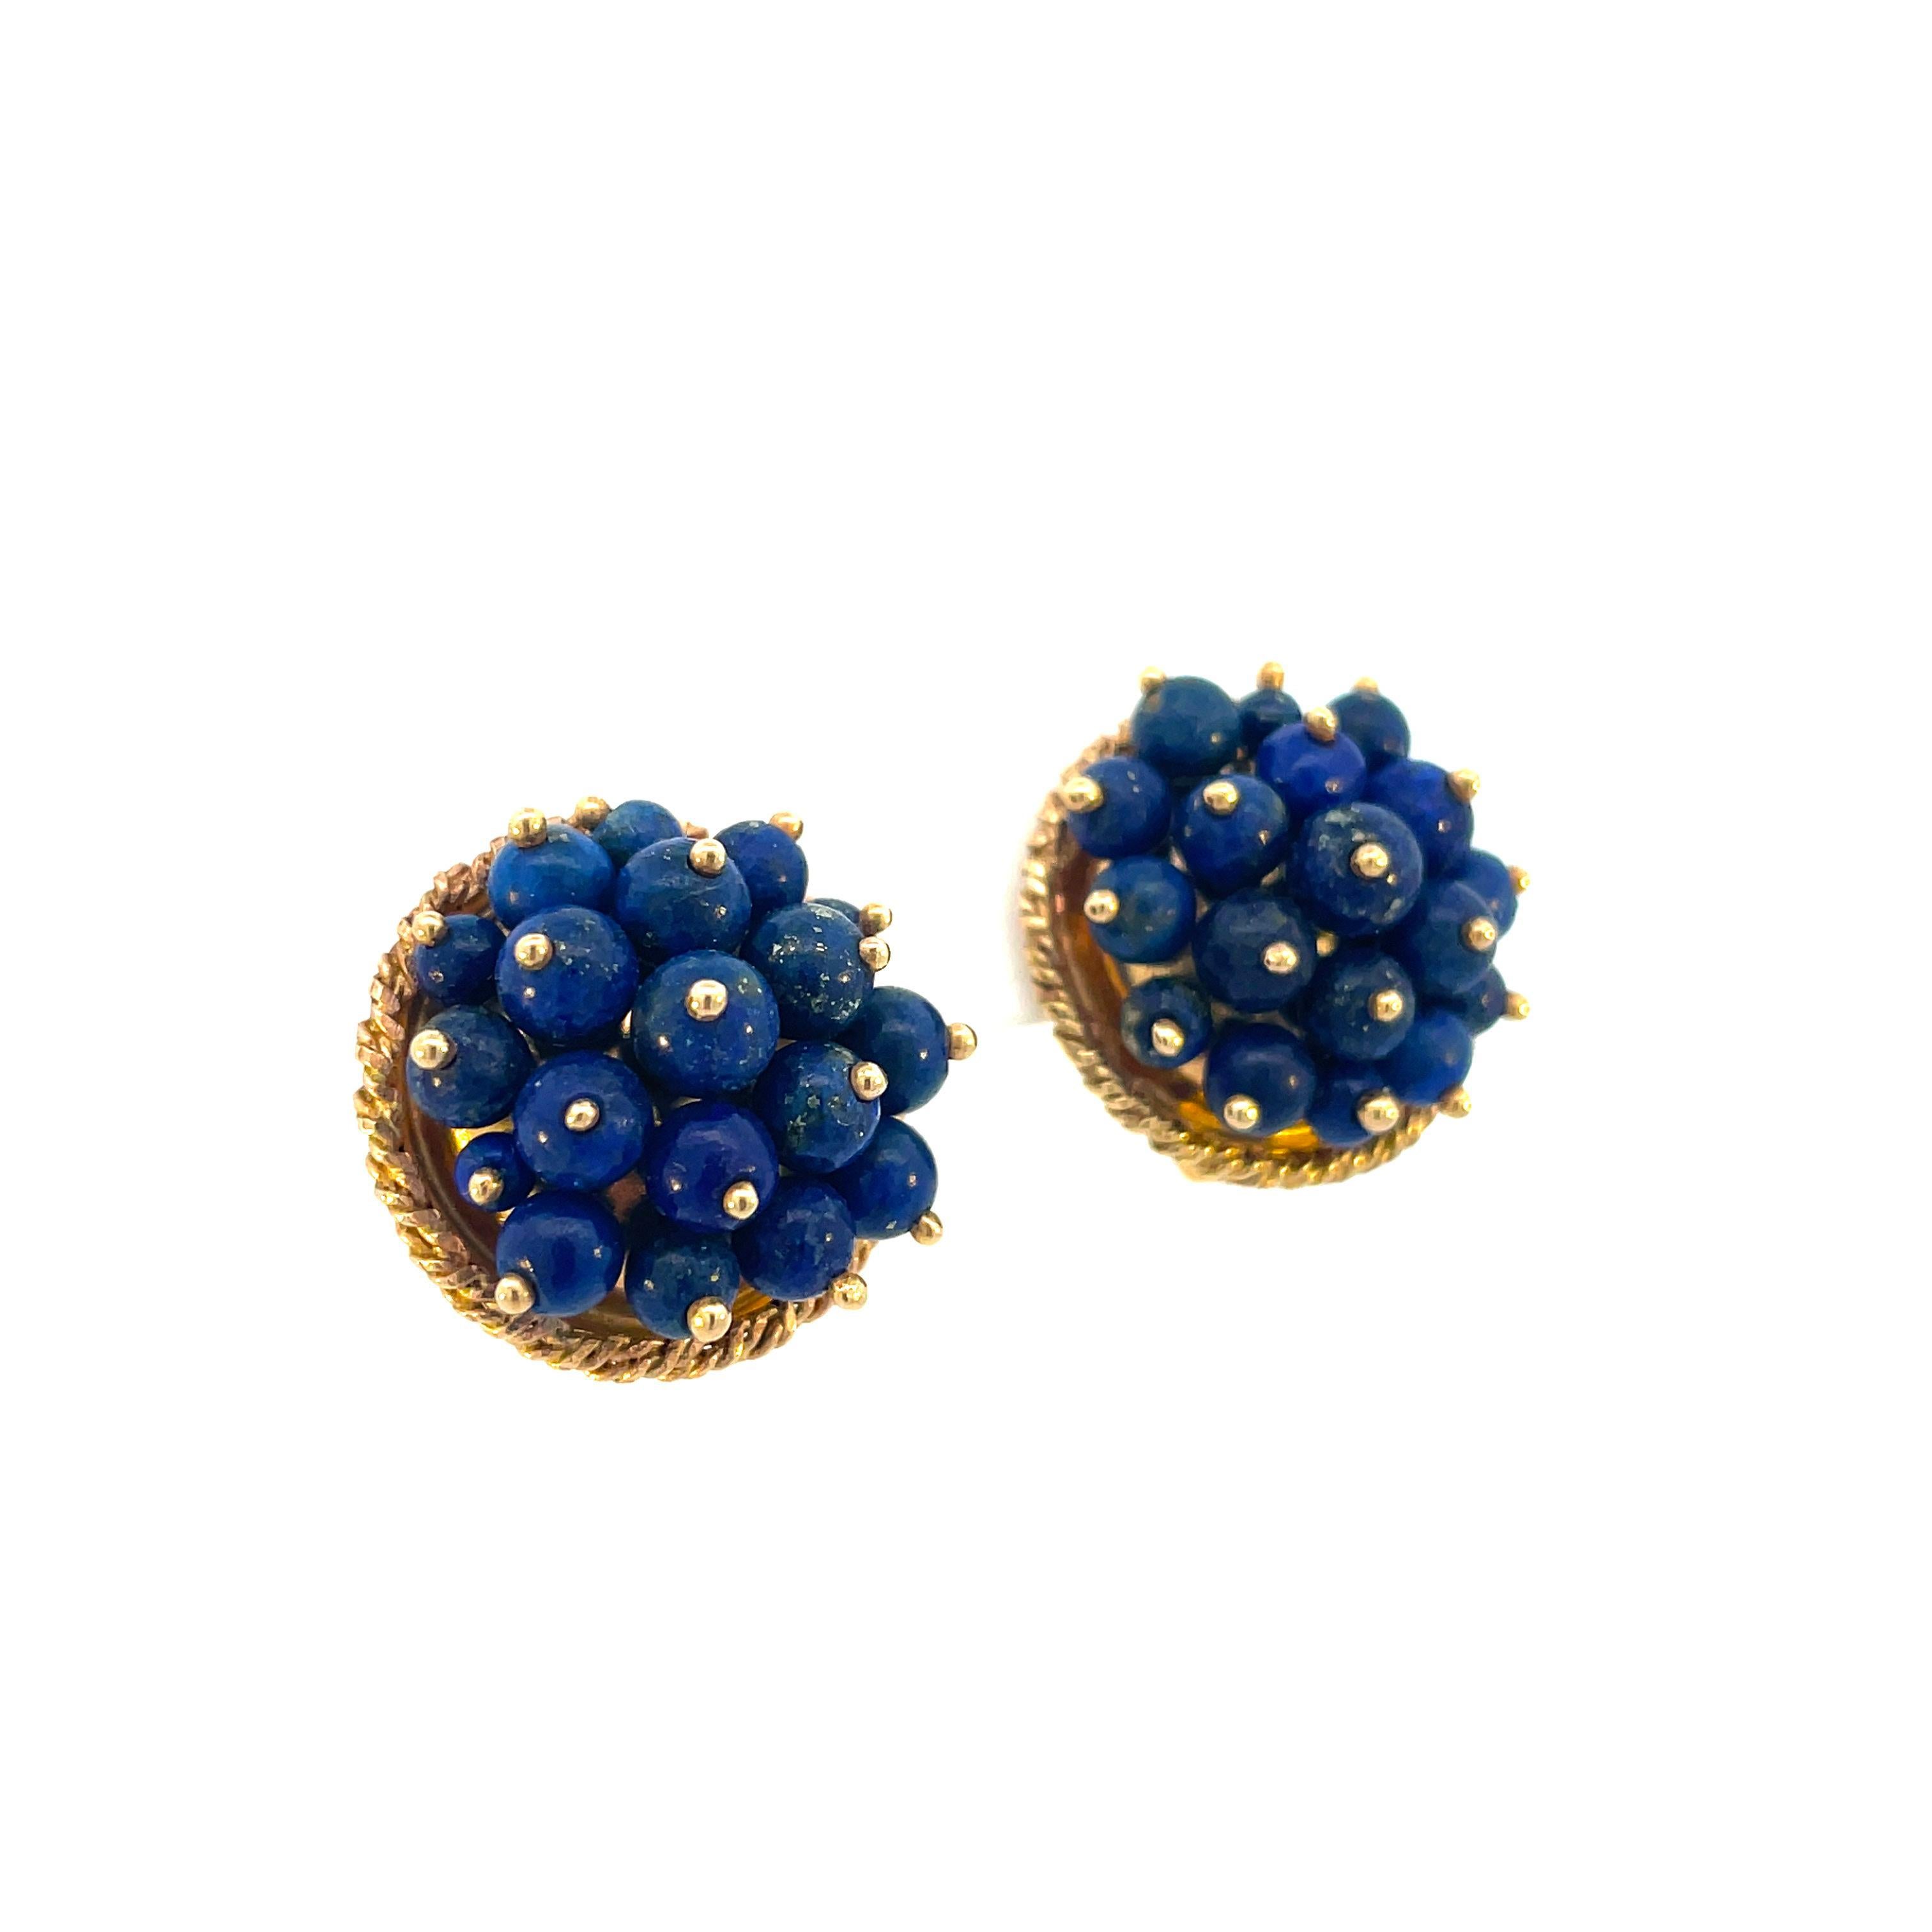 1960s 14K Yellow Gold Lapis Bead Lever-Back Earrings In Good Condition For Sale In Lexington, KY